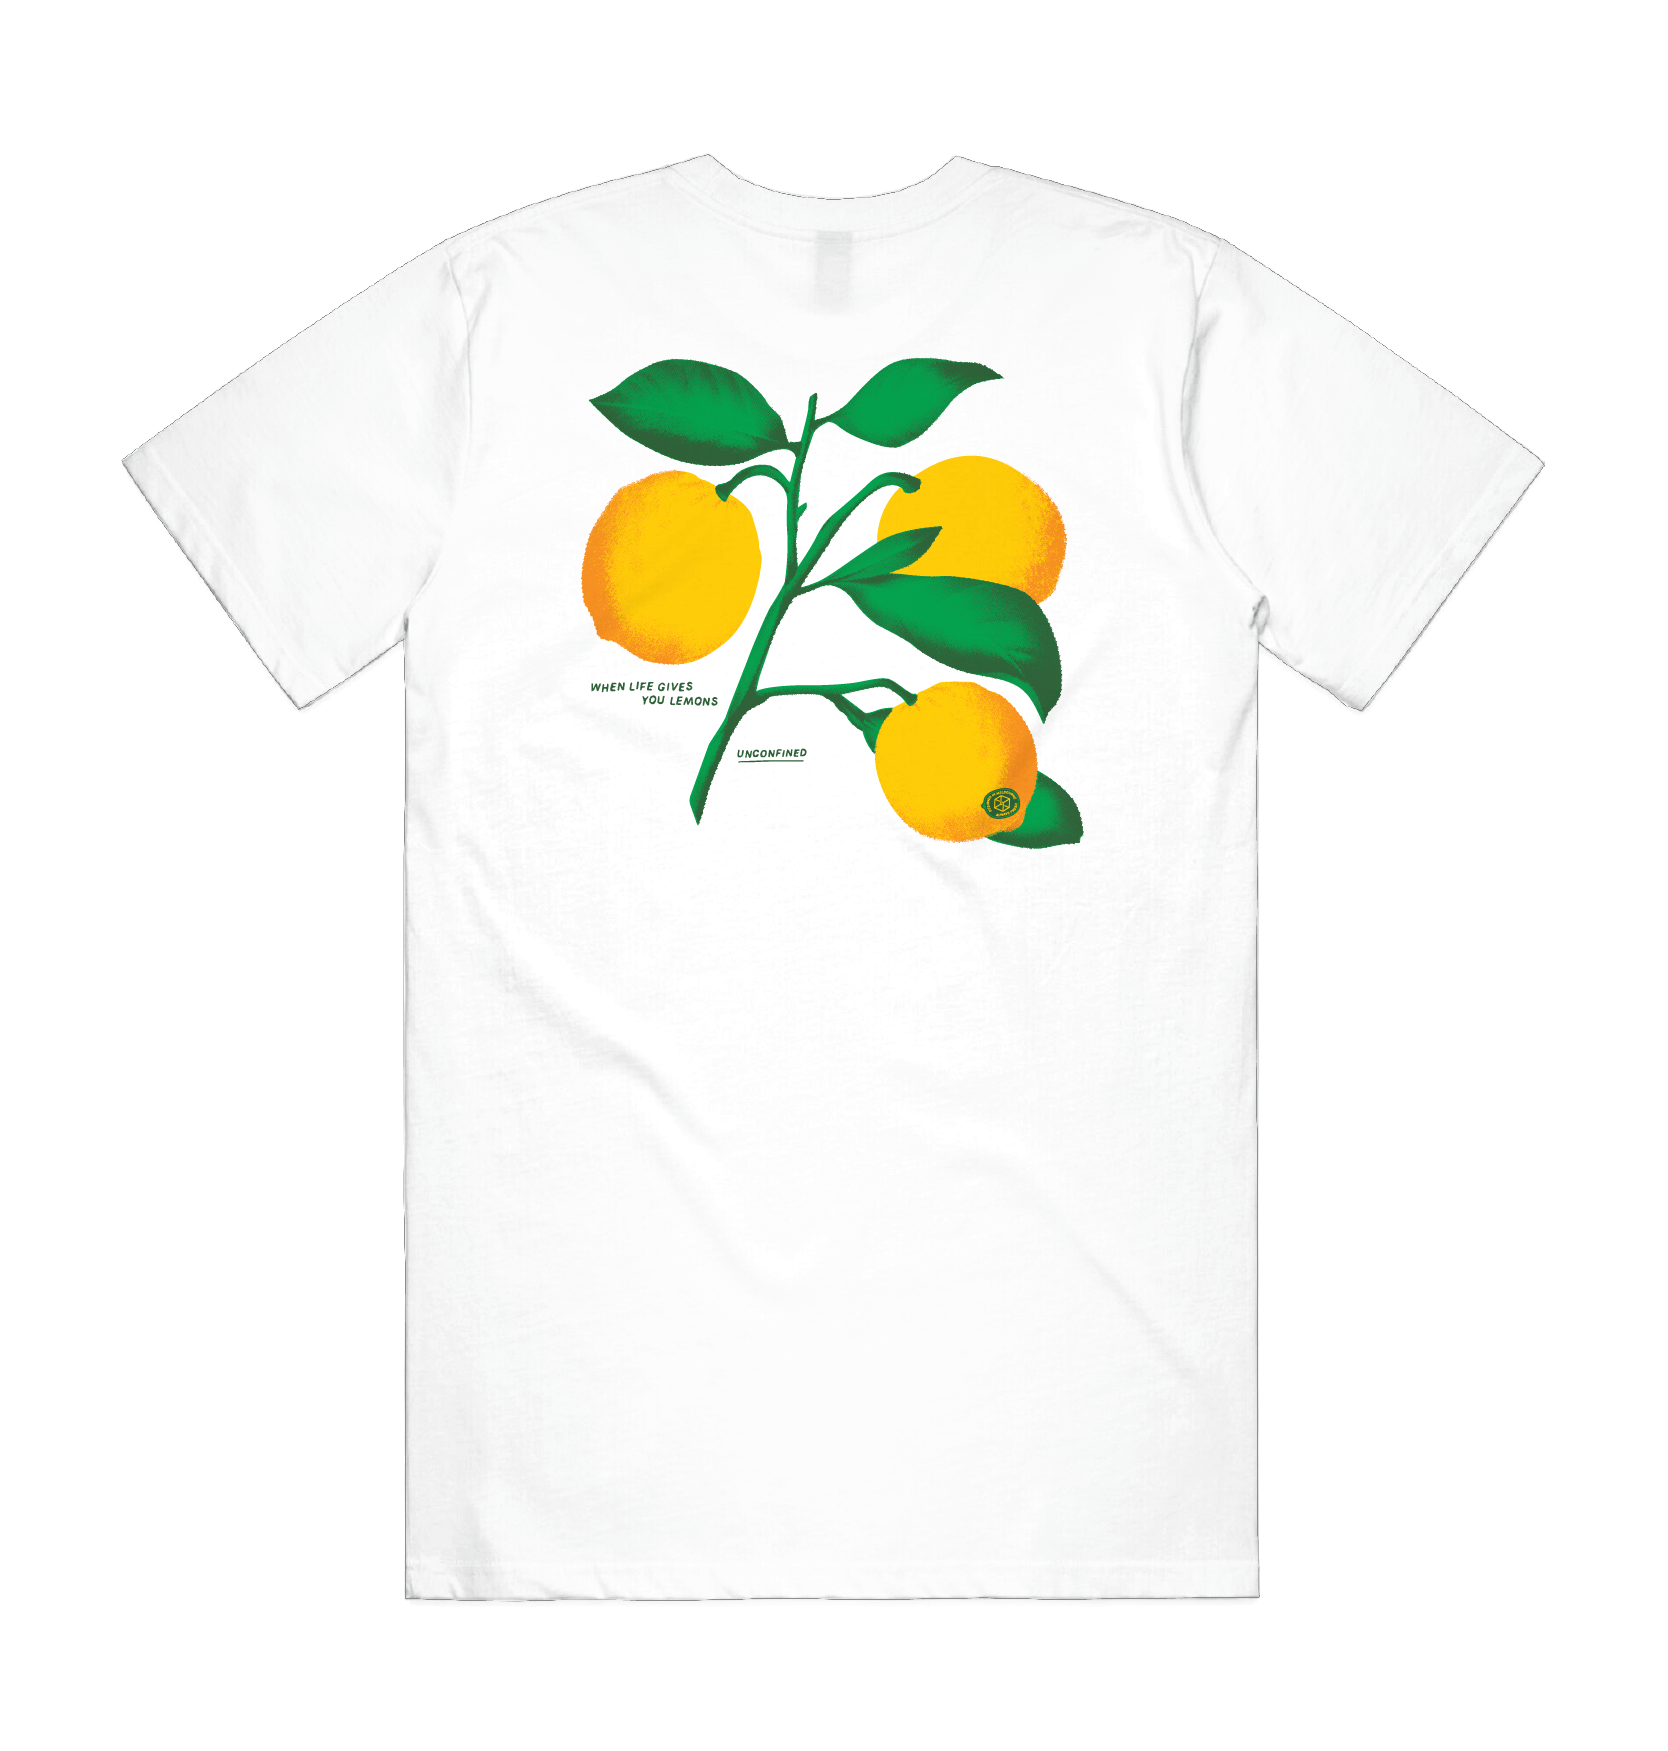 When life gives you Lemons Graphic T-Shirt